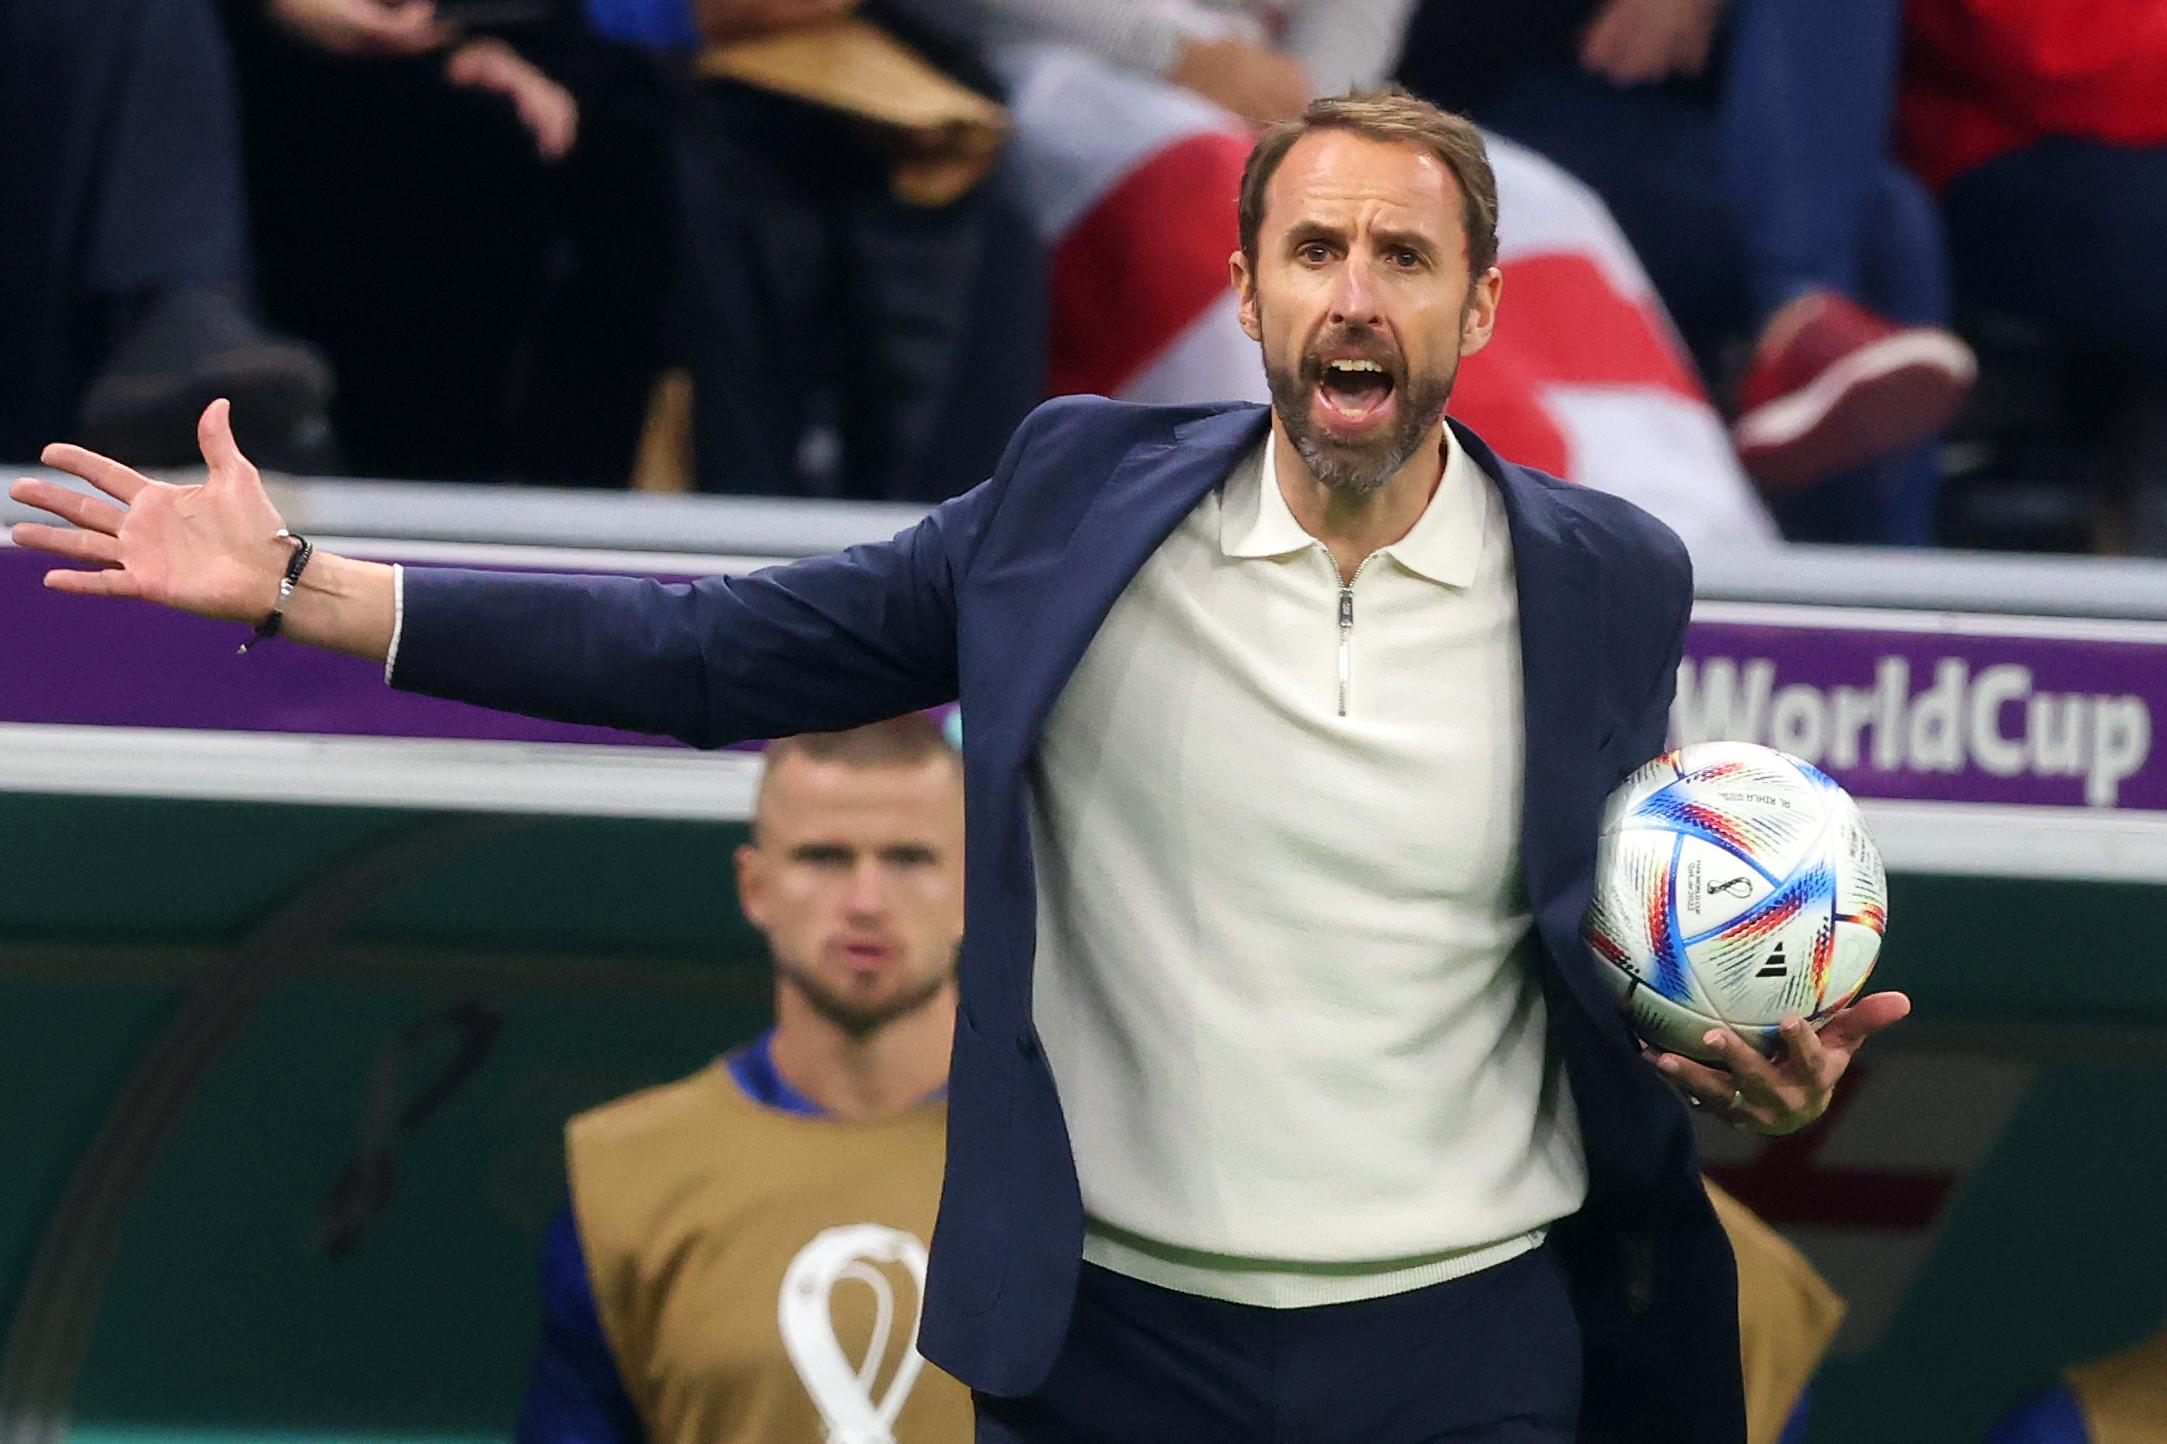 England Exit – TEARS FOR SOUTHGATE?